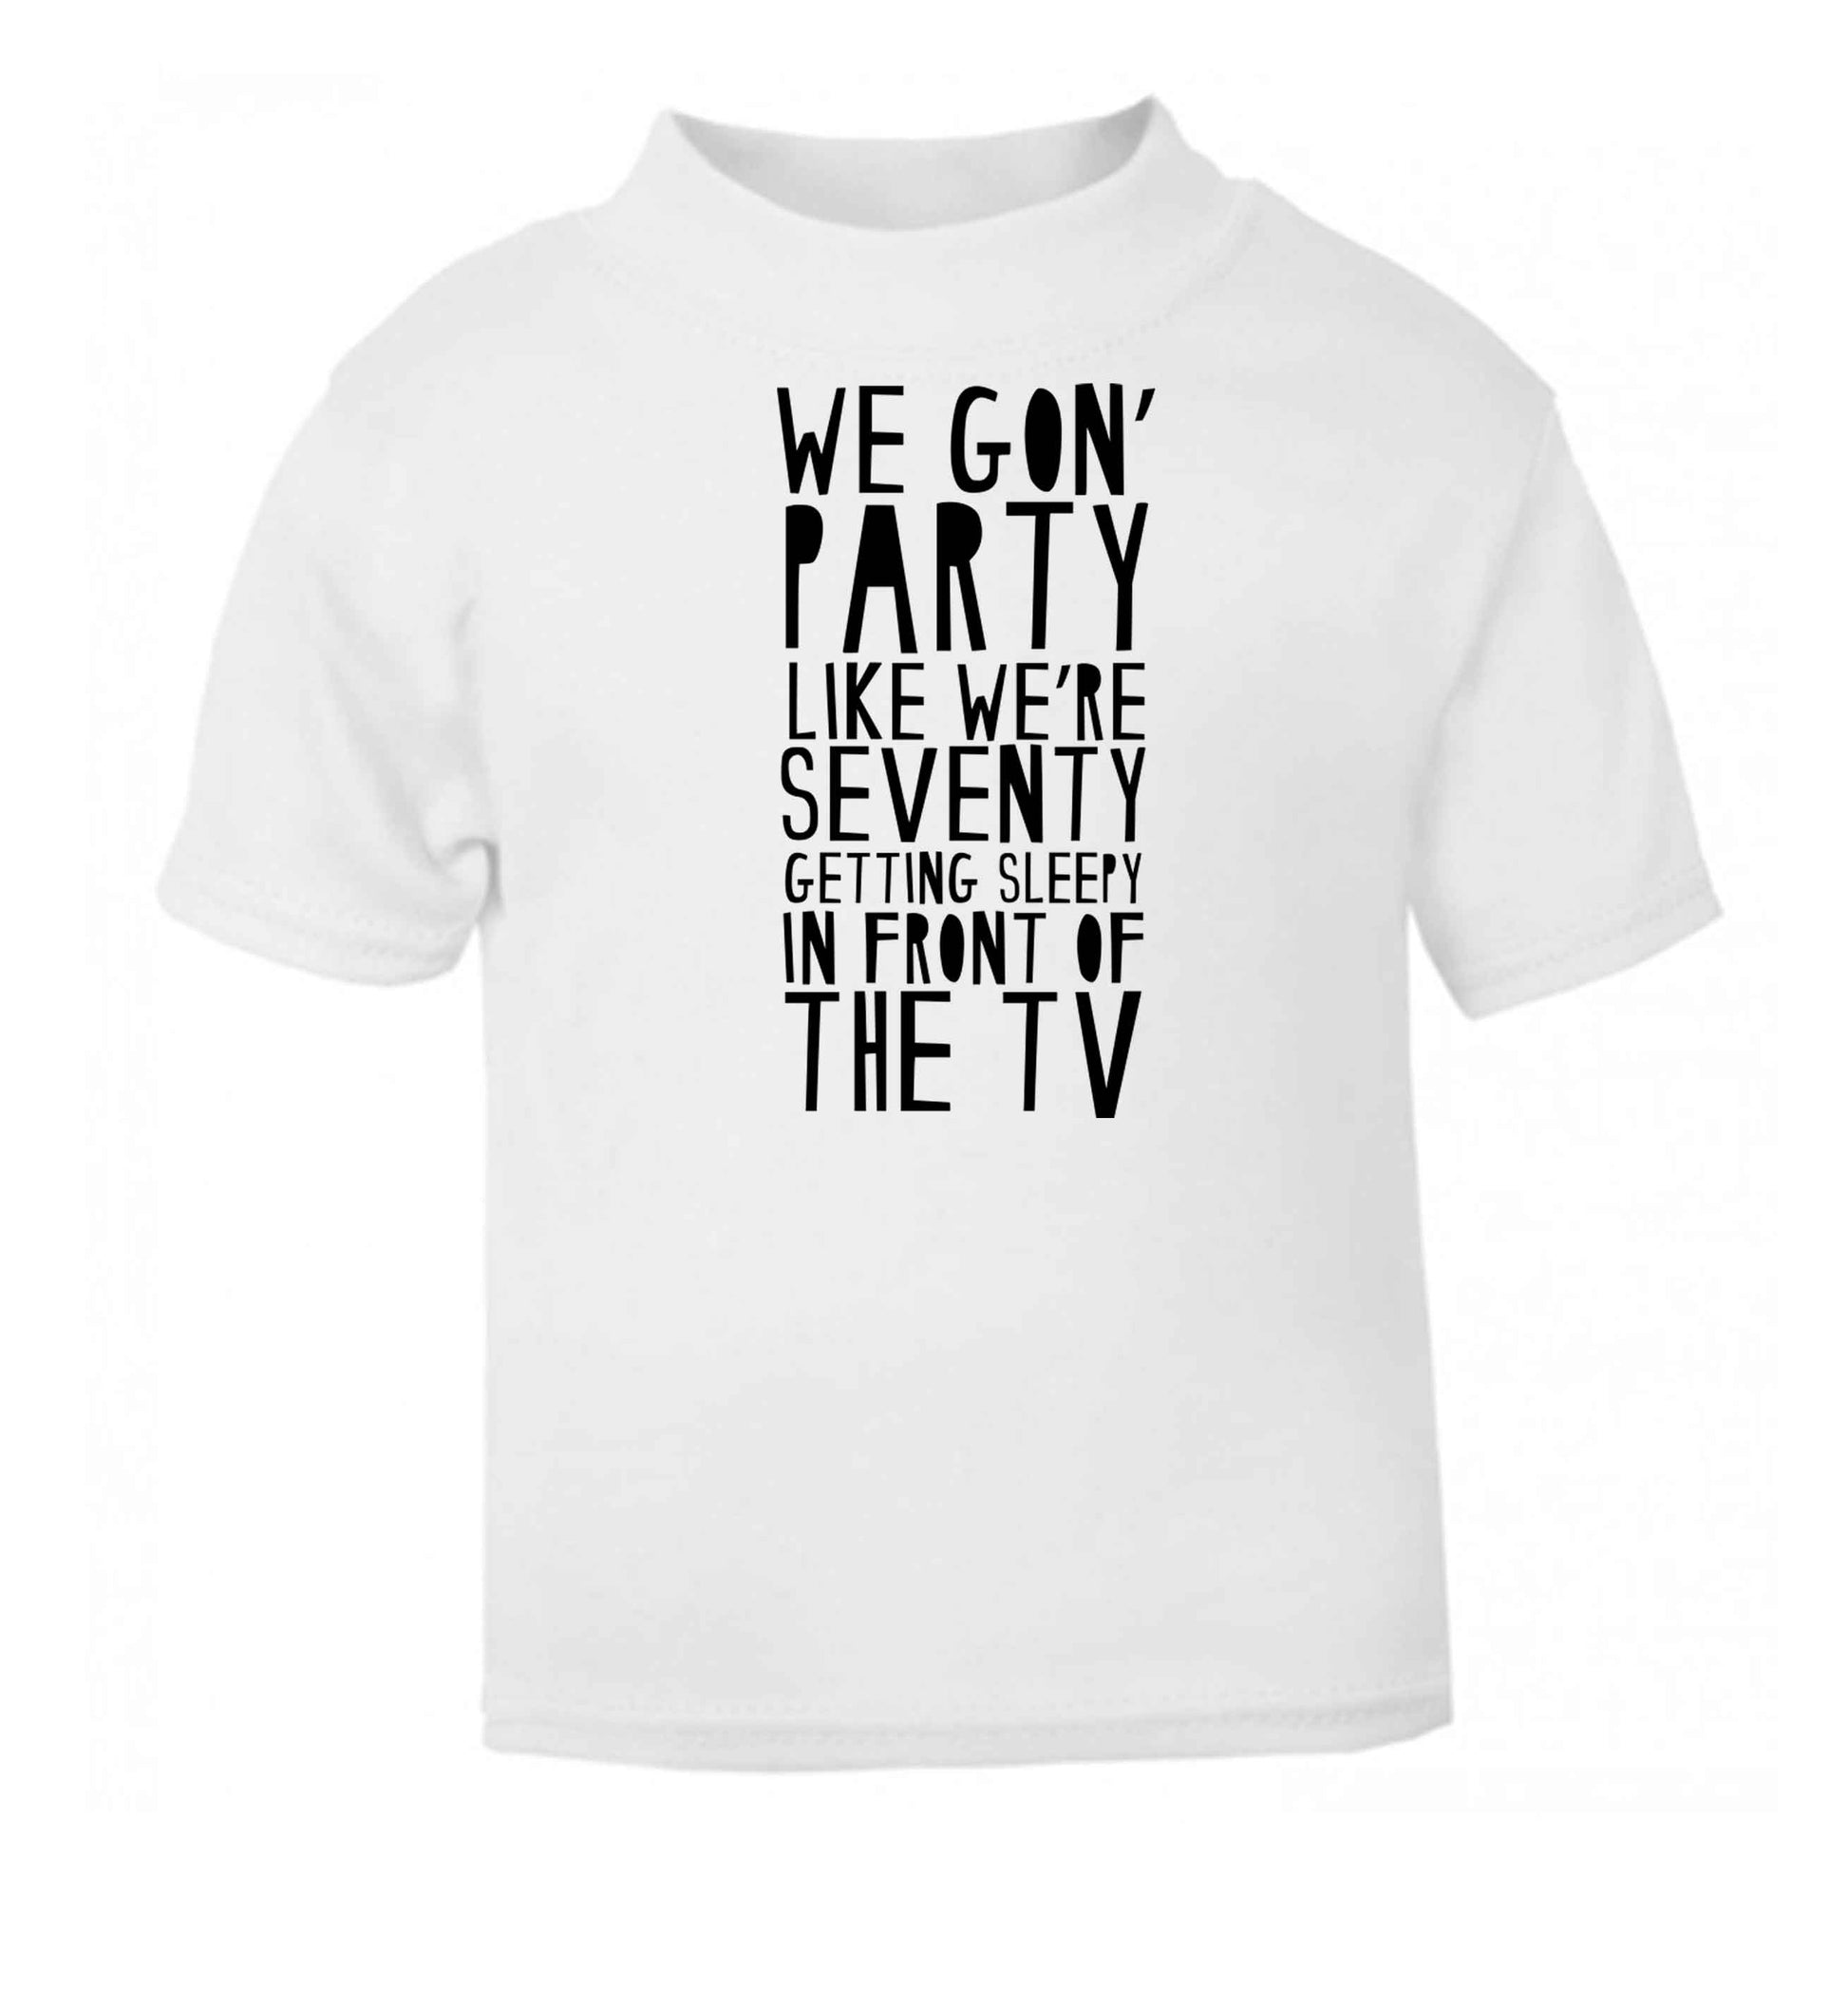 We gon' party like we're seventy getting sleepy in front of the TV white baby toddler Tshirt 2 Years